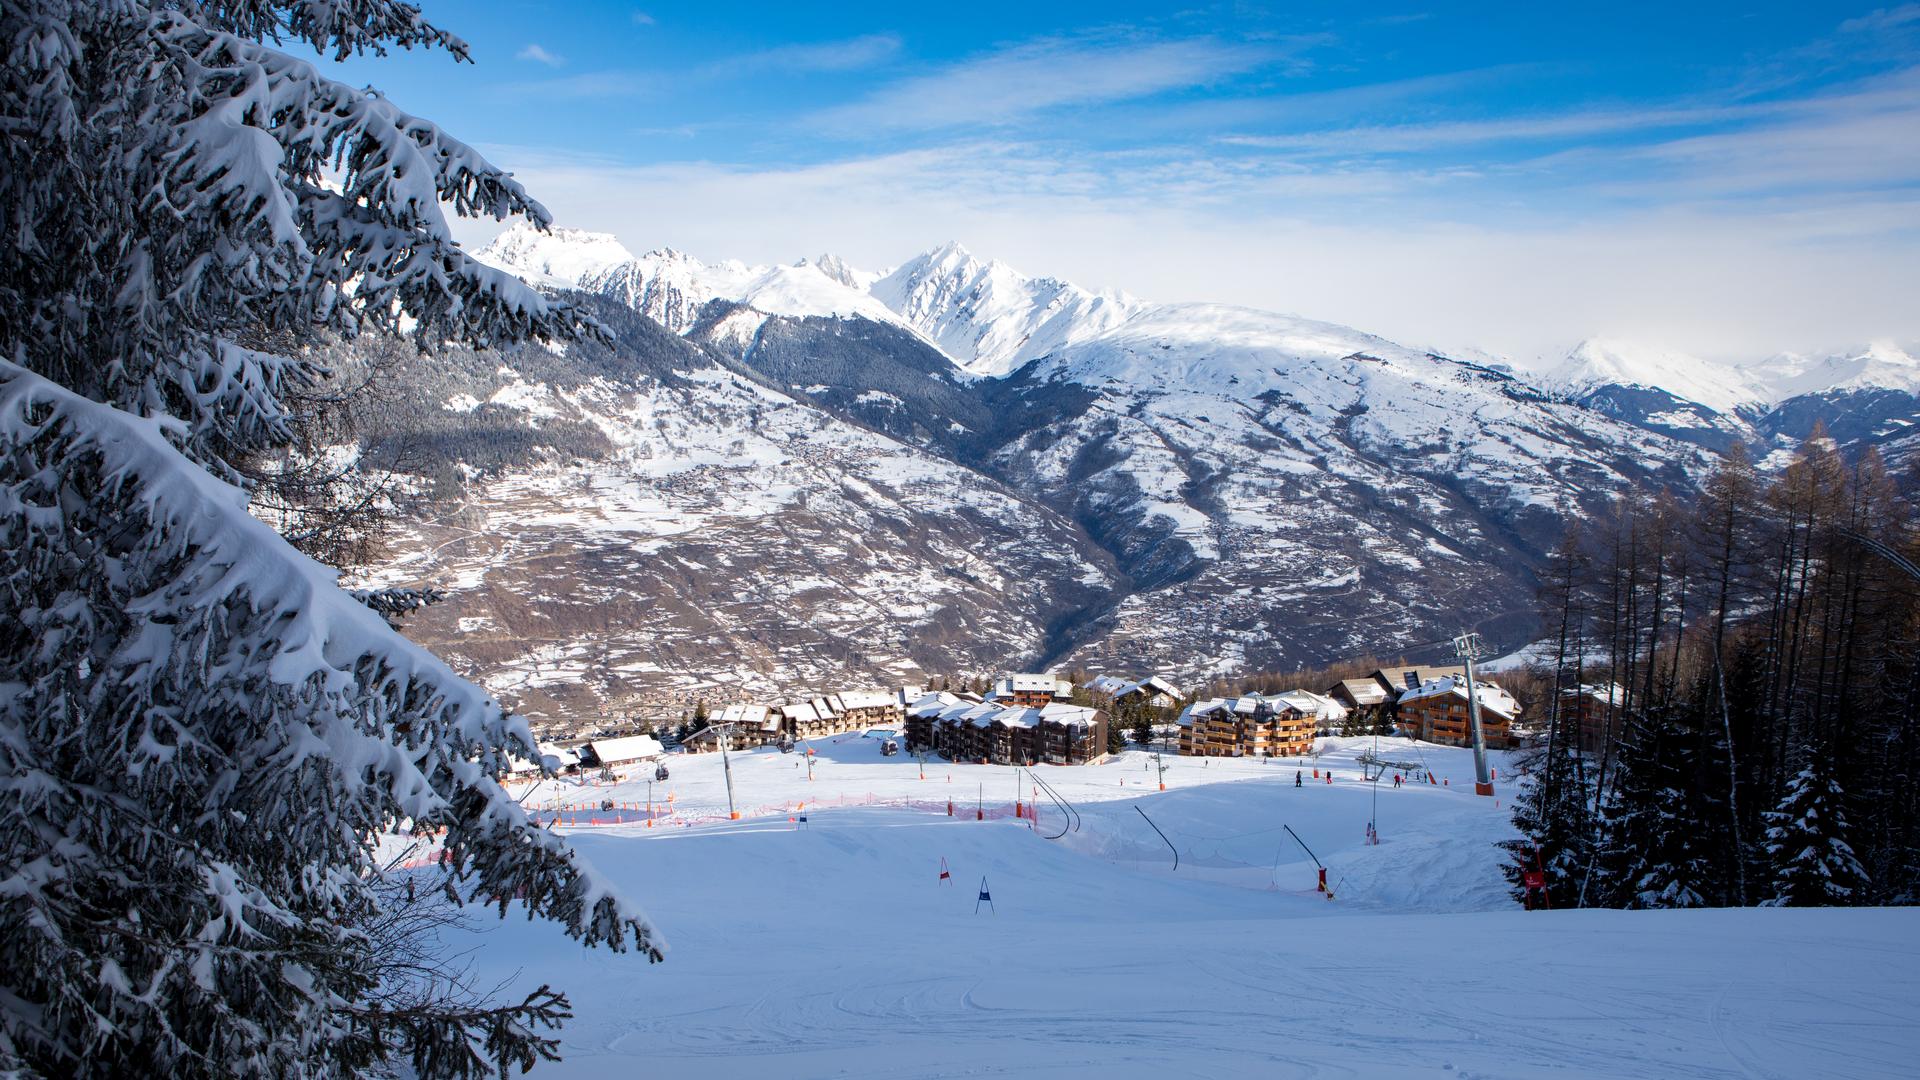 Discover Montalbert La Plagne - Your Gateway to the French Alps